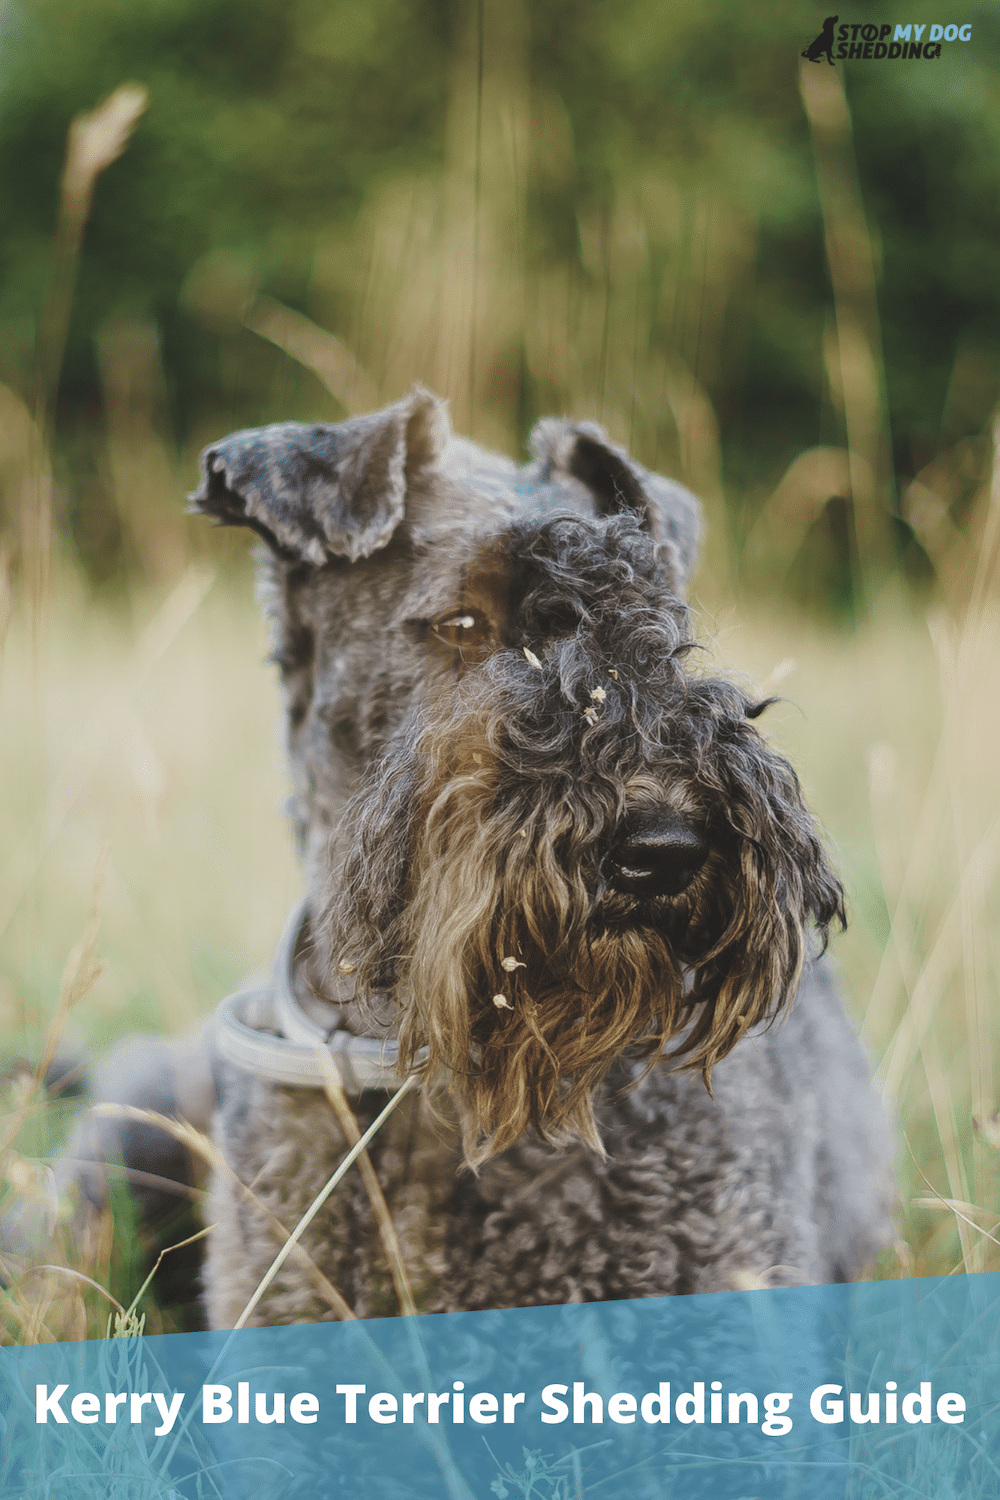 Do Kerry Blue Terriers Shed? (Shedding & Grooming Guide)